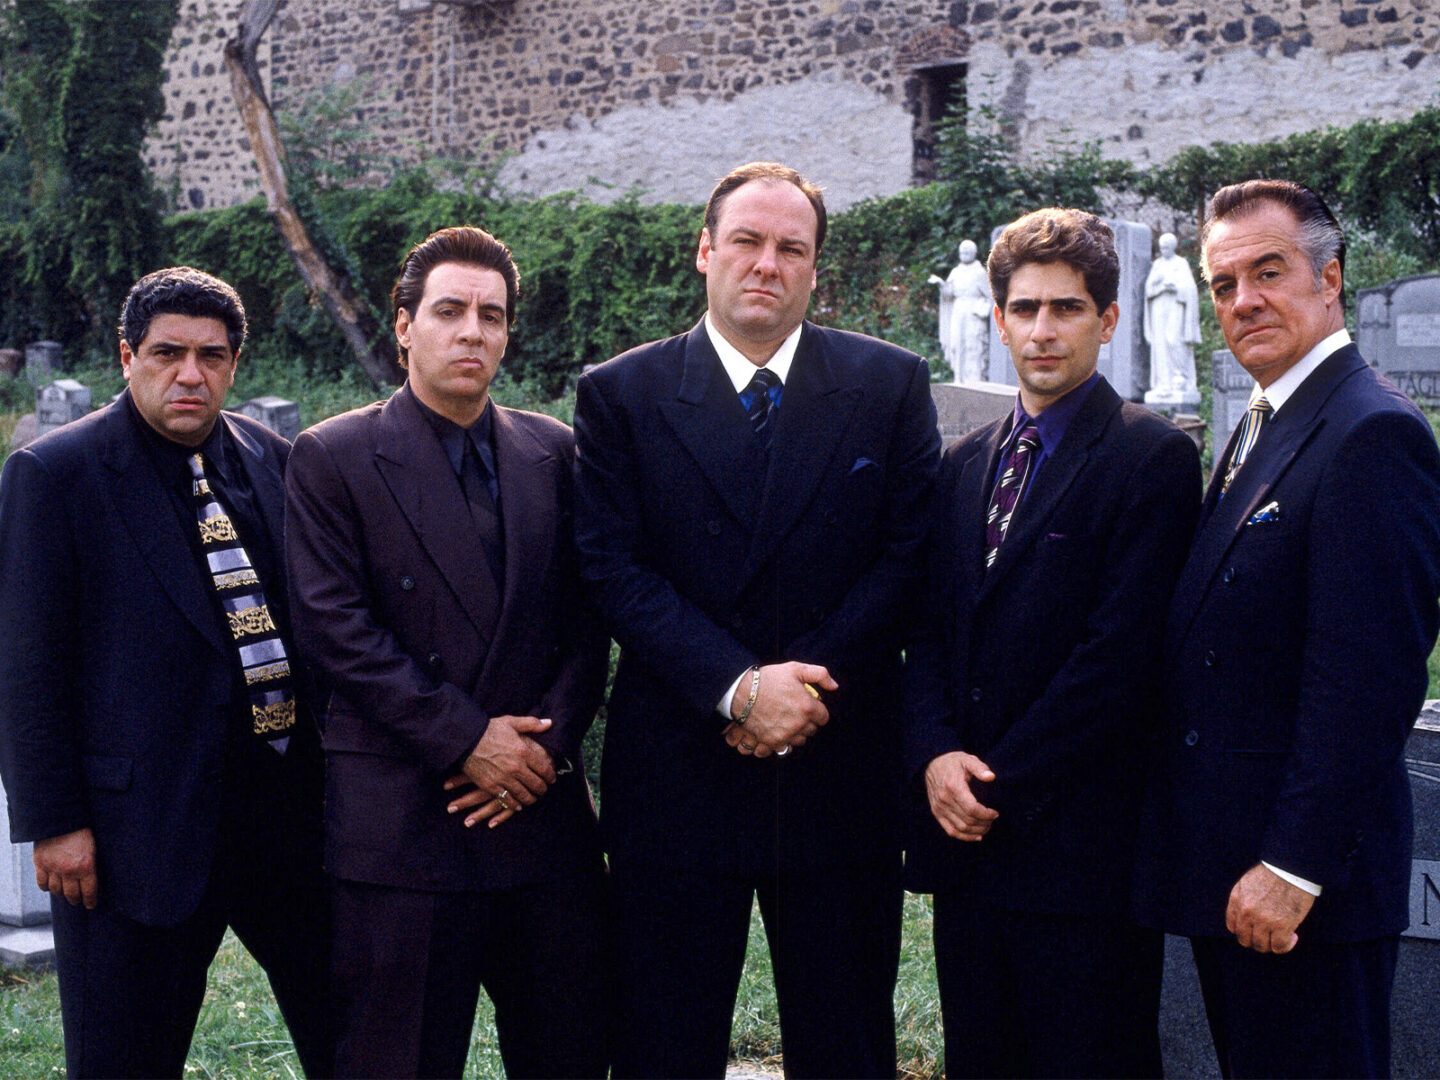 Are you a fan of ‘The Sopranos’? This will interest you